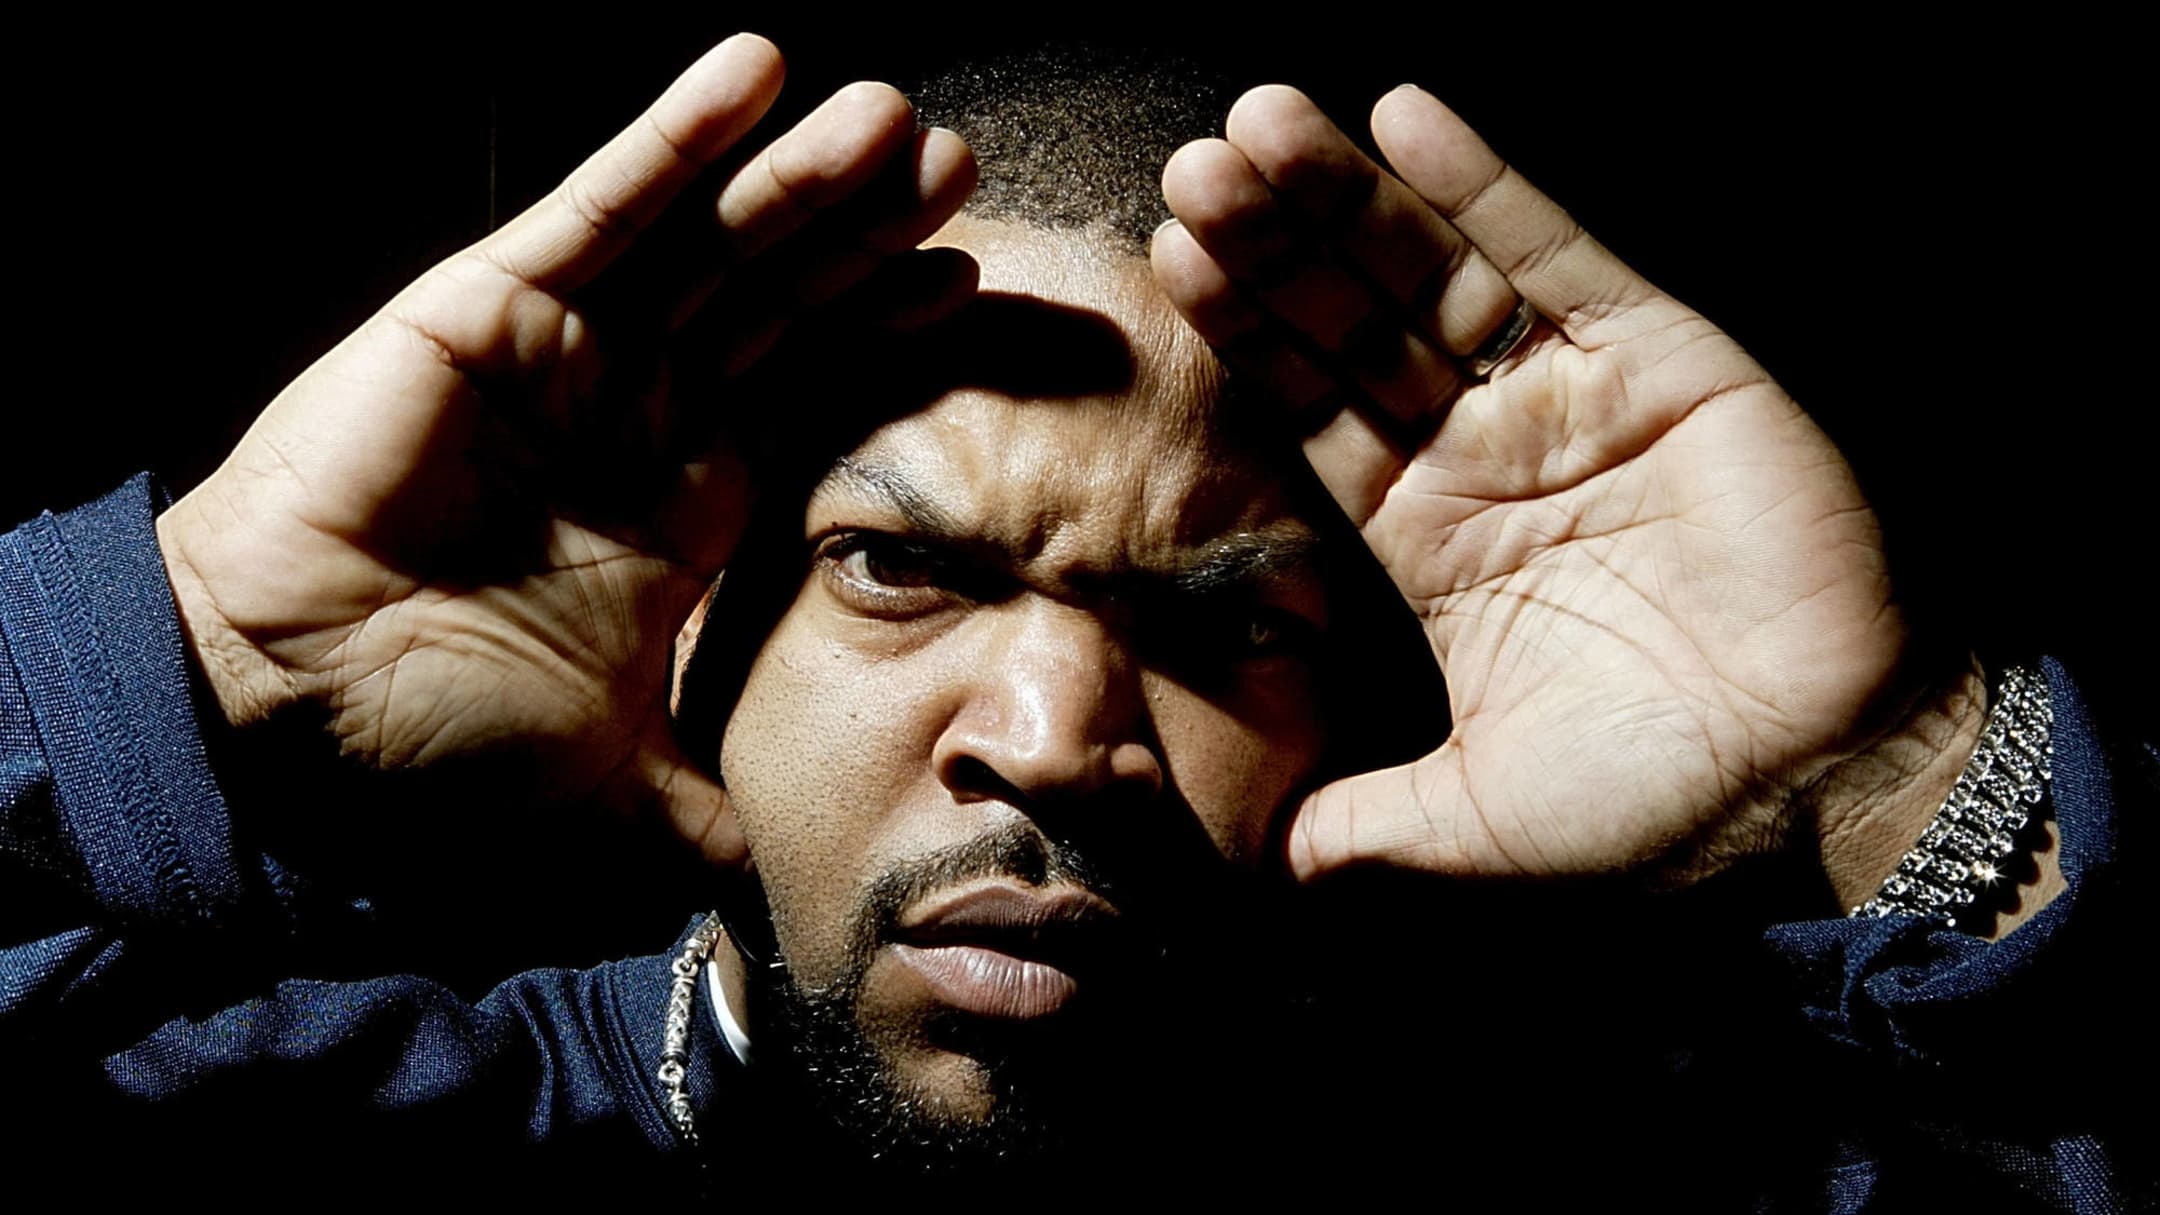 15 essential Ice Cube tracks to listen to on his birthday